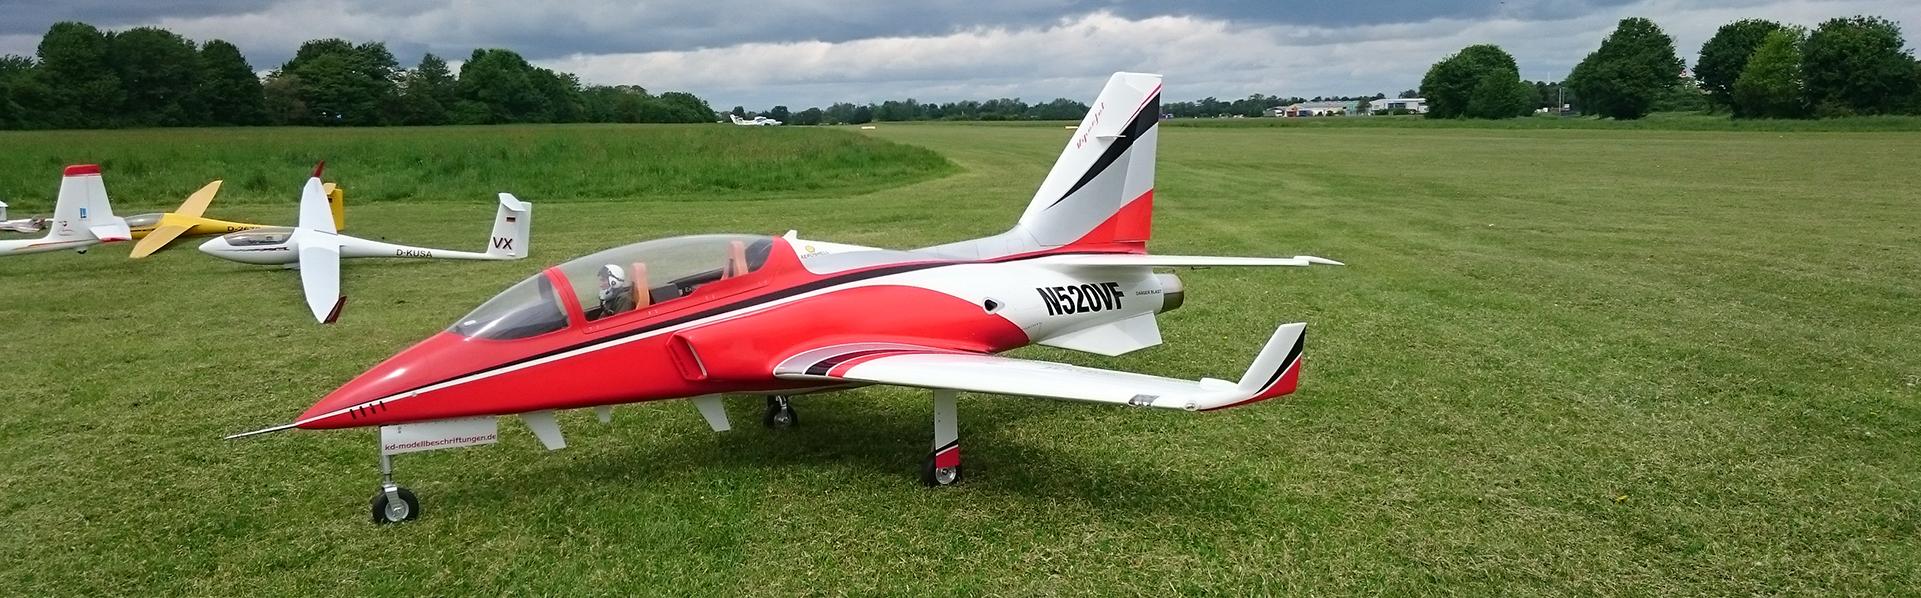 Large Rc Jet Planes For Sale: Types and Features of Large RC Jet Planes for Sale.